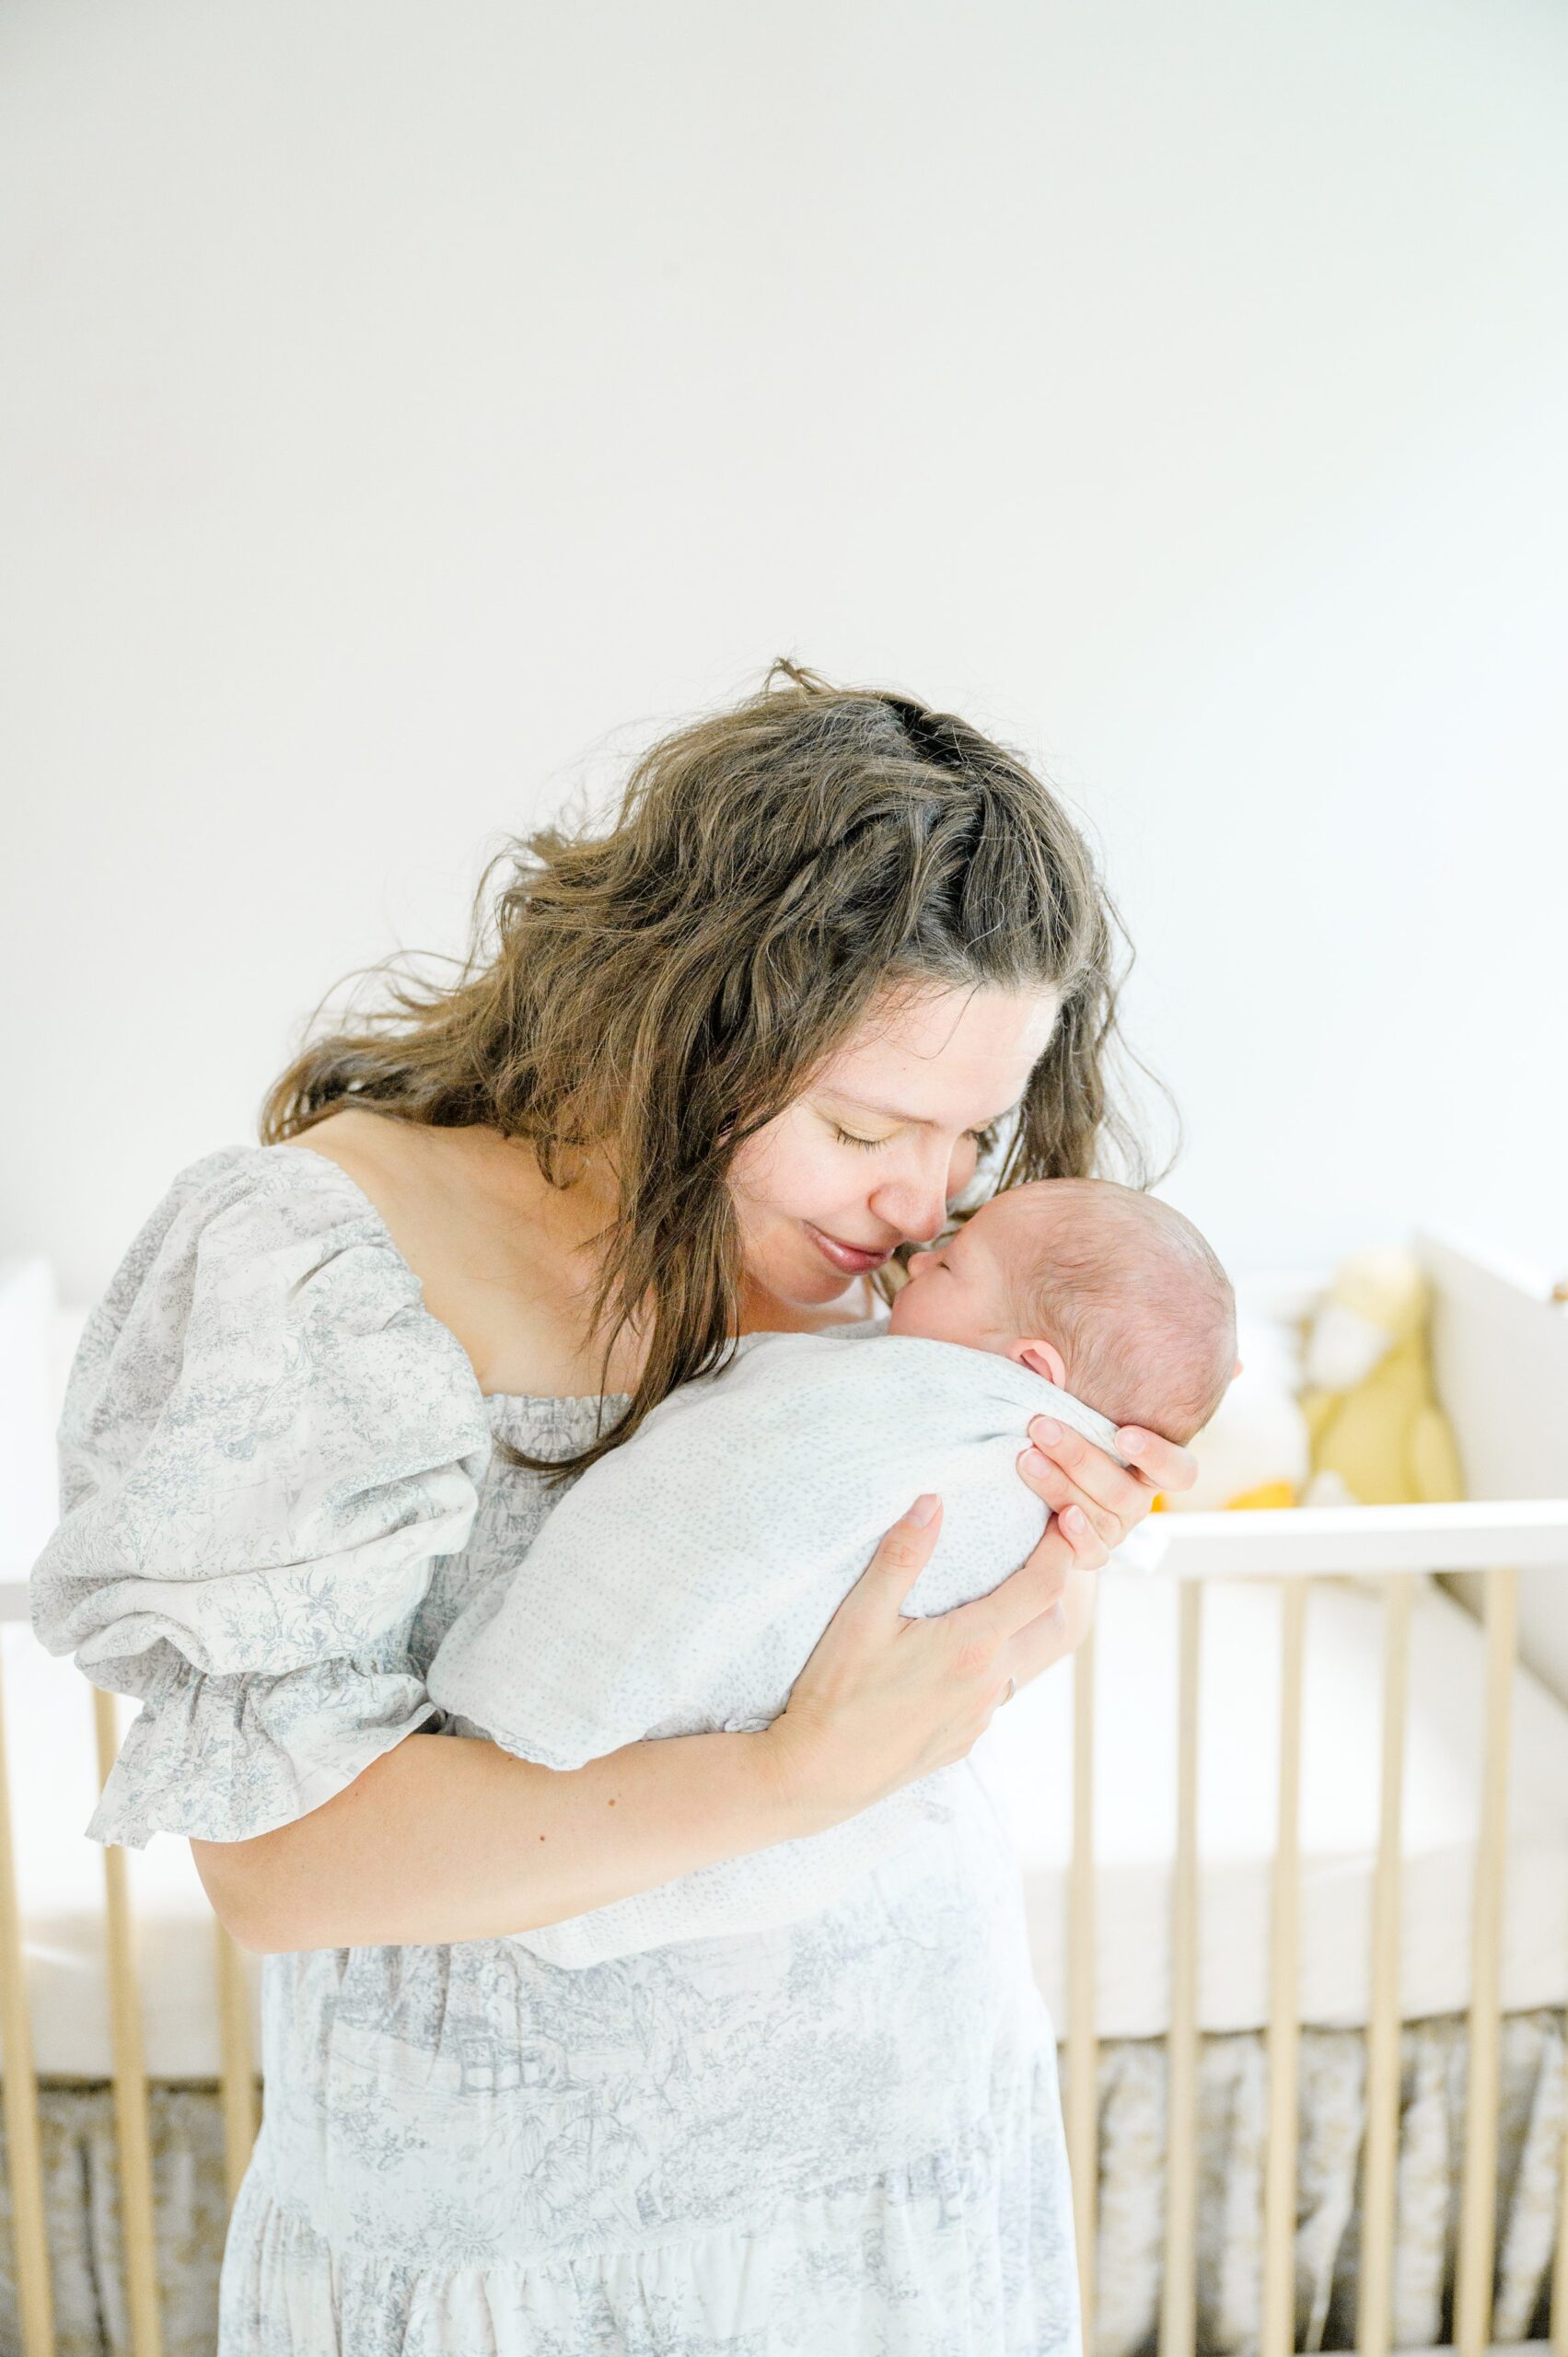 In home newborn session in Washington, DC photographed by Baltimore lifestyle newborn photographer Cait Kramer.